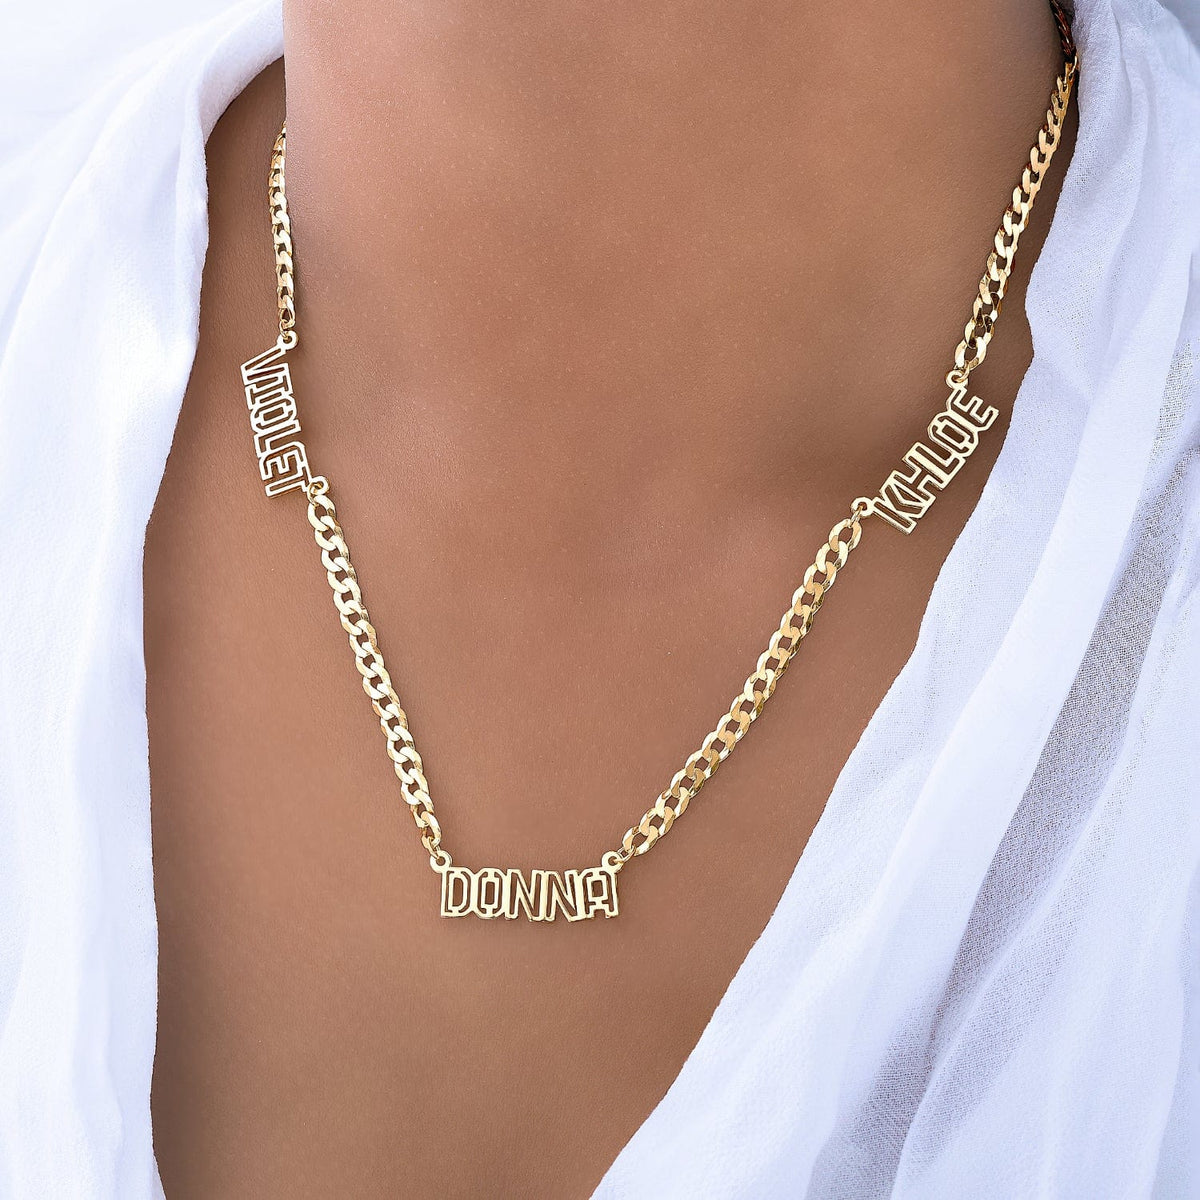 Outlined Three-Name Name Necklace